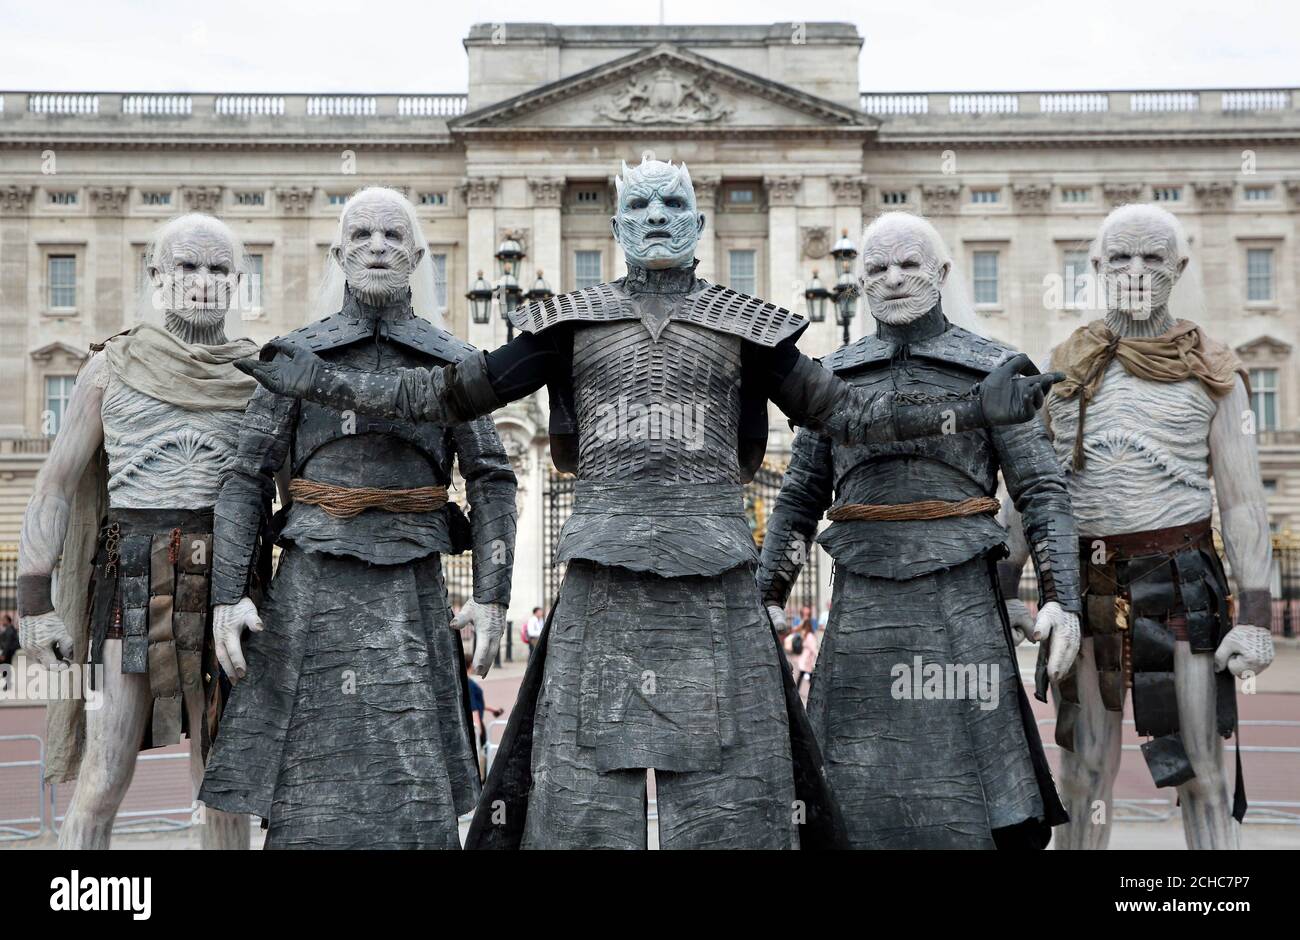 Five models dressed as White Walkers from Game of Thrones, led by the Night King, pass by Buckingham Palace in London to celebrate the upcoming start of season 7 of the television show, which airs at 9pm on Monday July 17th on Sky Atlantic. Stock Photo